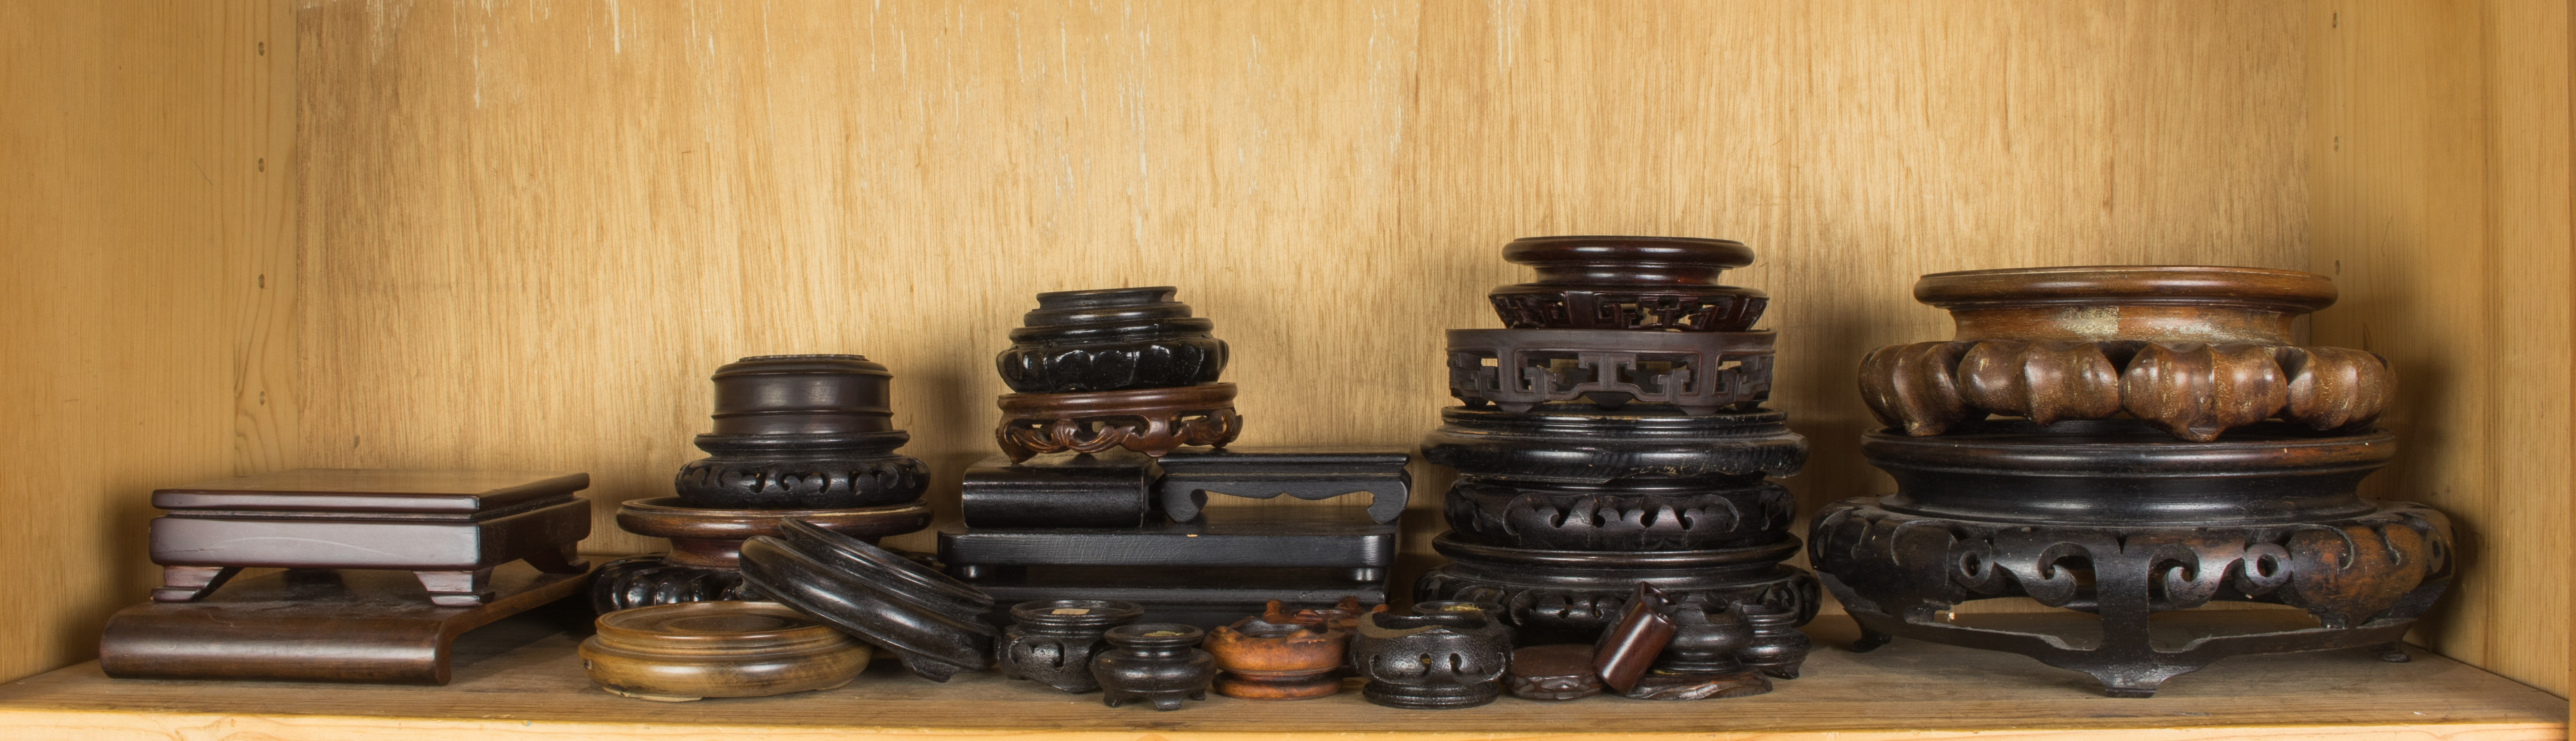 SHELF OF CHINESE WOOD DISPLAY STANDS